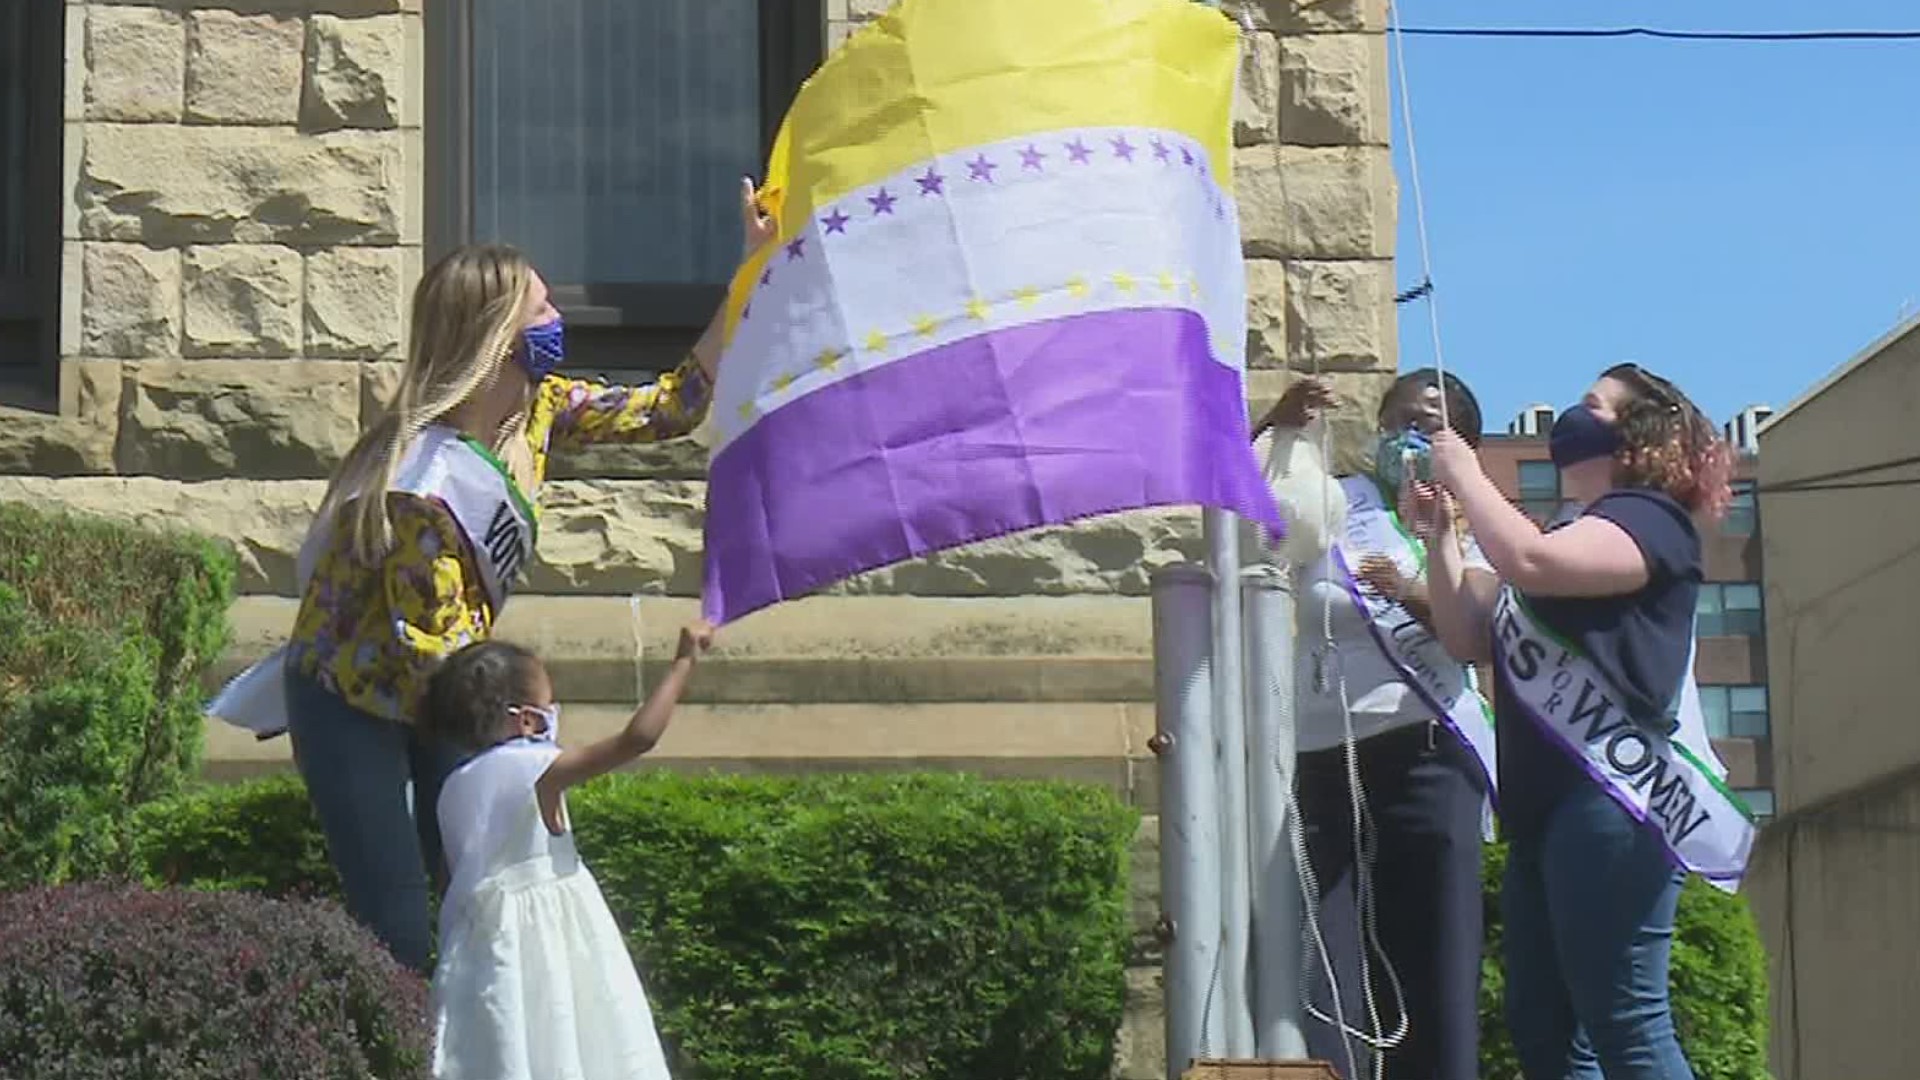 It was a celebration in Lackawanna County Saturday. 100 summers ago a landmark piece of legislation was passed that changed the world for women.